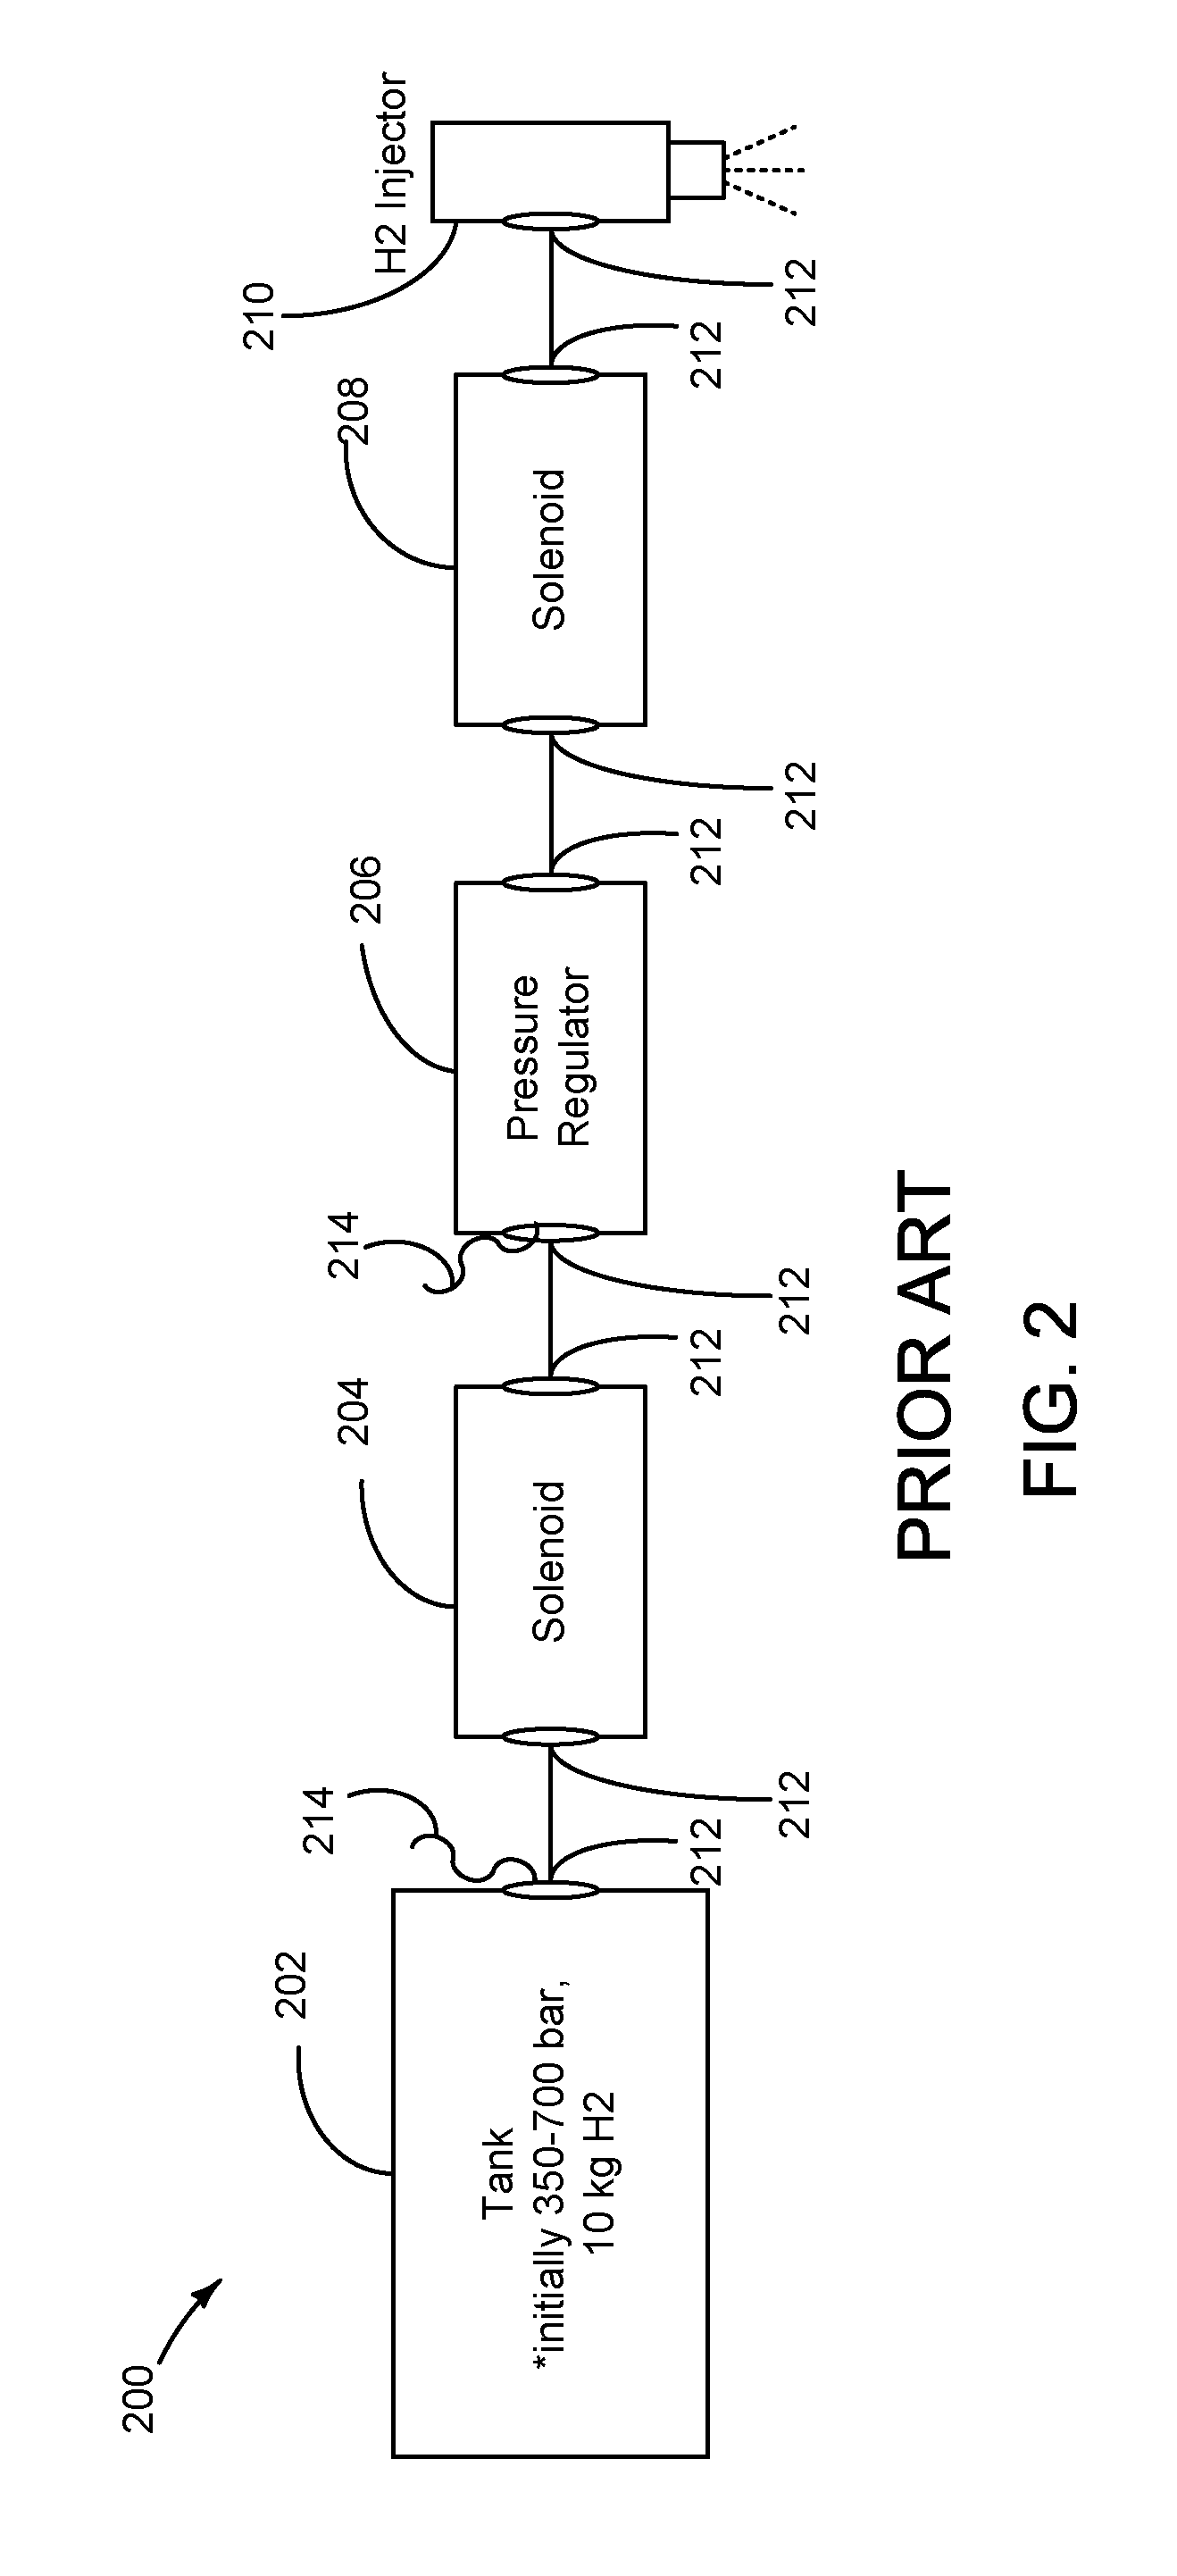 Integrated gaseous fuel delivery system